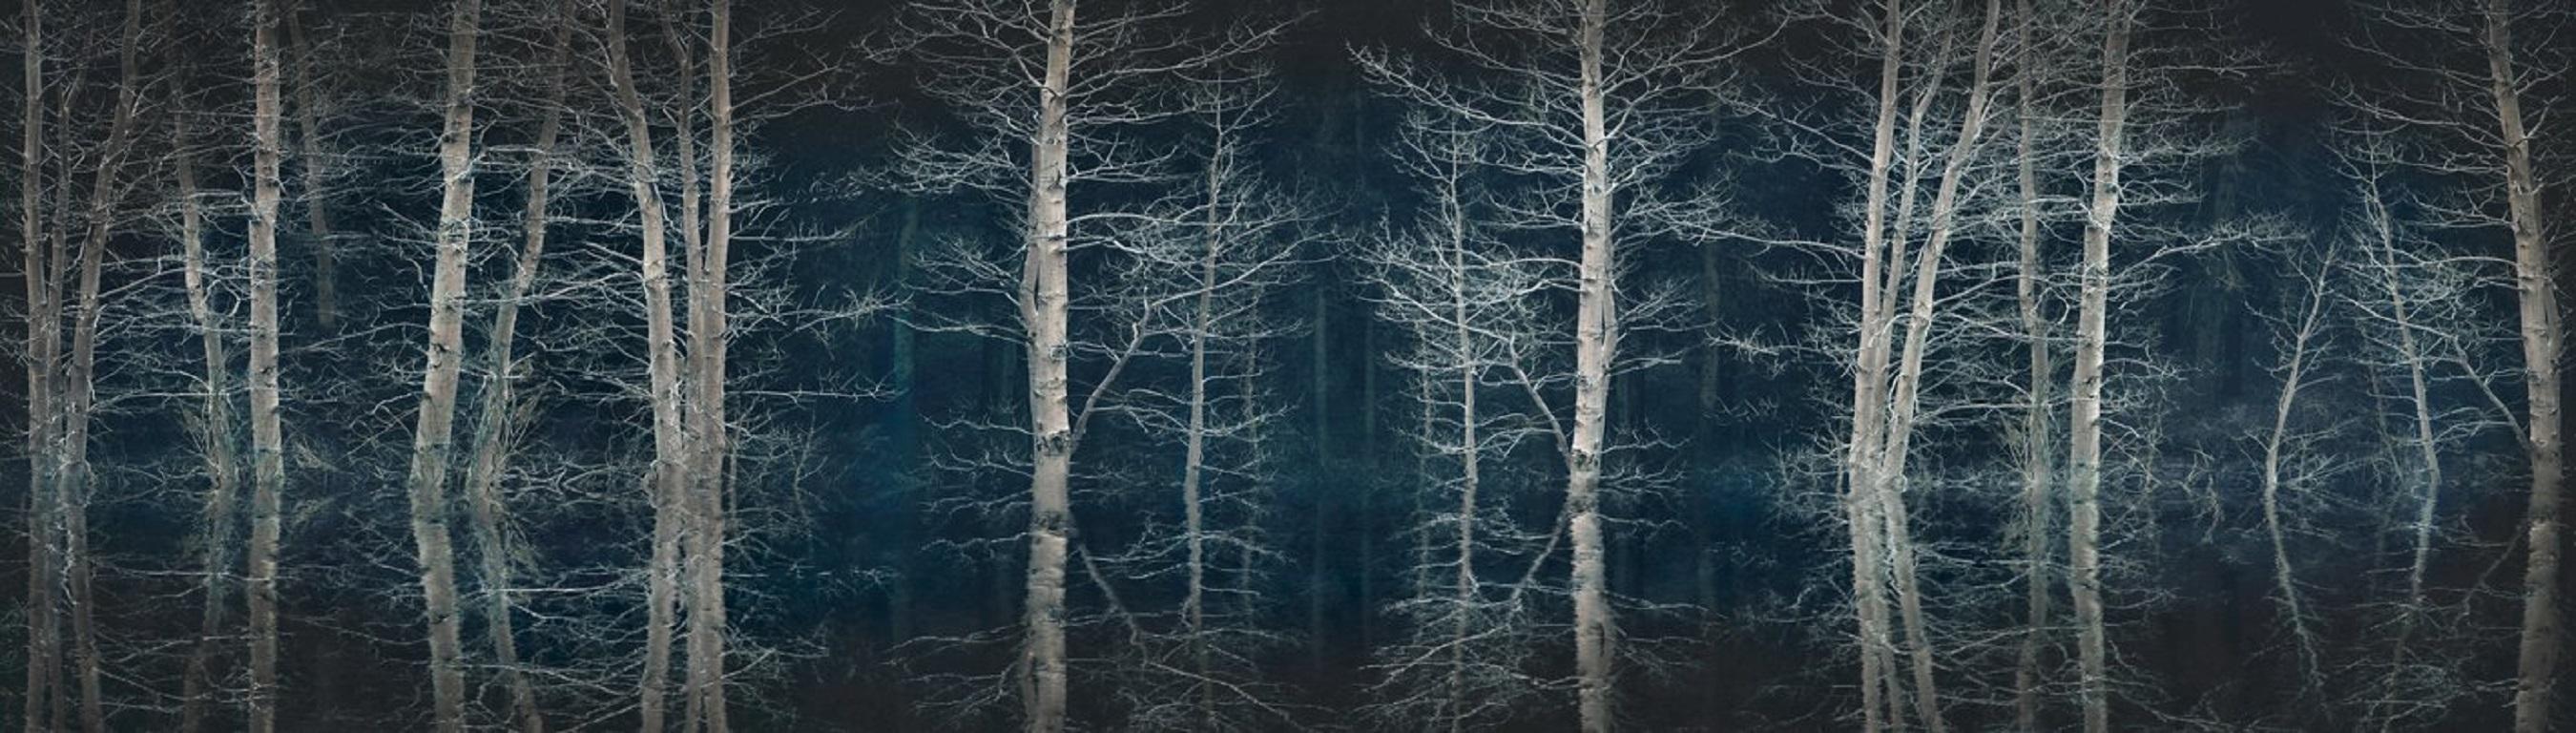 The calm serenity of a frozen forest at night.  An image of silence.
–
Cawston’s landscapes are filled with delicate harmonious tones.  They resonate feeling and leave the viewer rapt, lost in the detail as if listening to the echoes of a